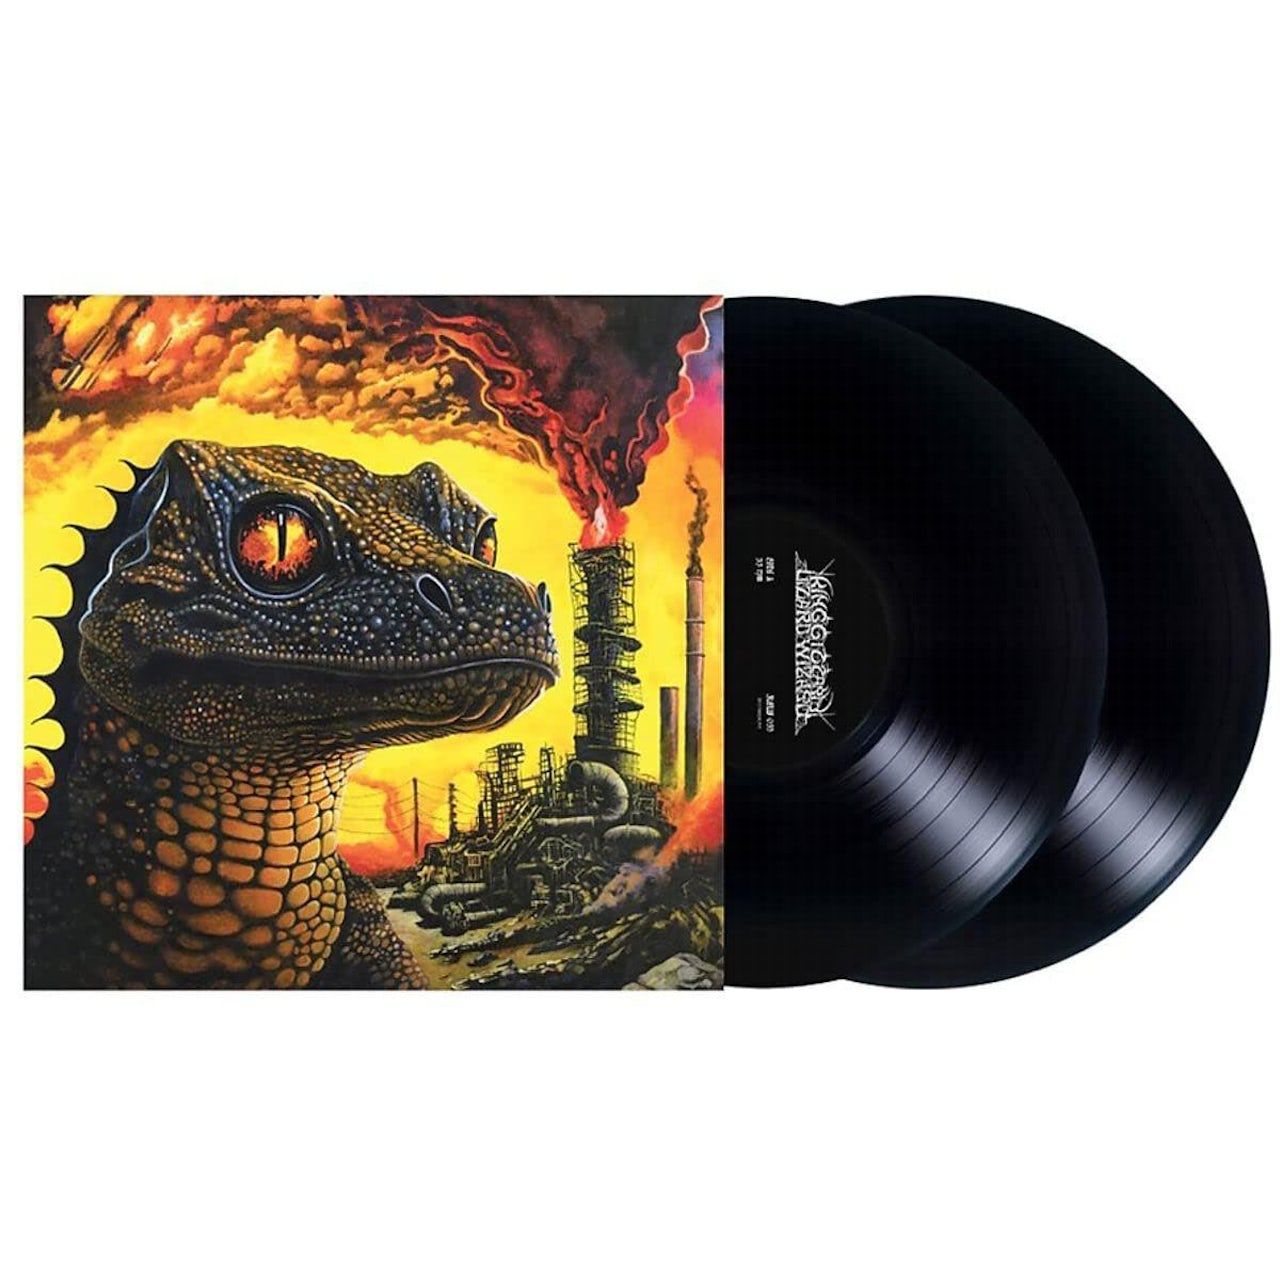 0842812189524, Виниловая пластинка King Gizzard & The Lizard Wizard, Petrodragonic Apocalypse; Or, Dawn Of Eternal Night: An Annihilation Of Planet Earth And The Beginning Of Merciless Damnation (coloured) king gizzard and the lizard wizard виниловая пластинка king gizzard and the lizard wizard paper mache dream balloon